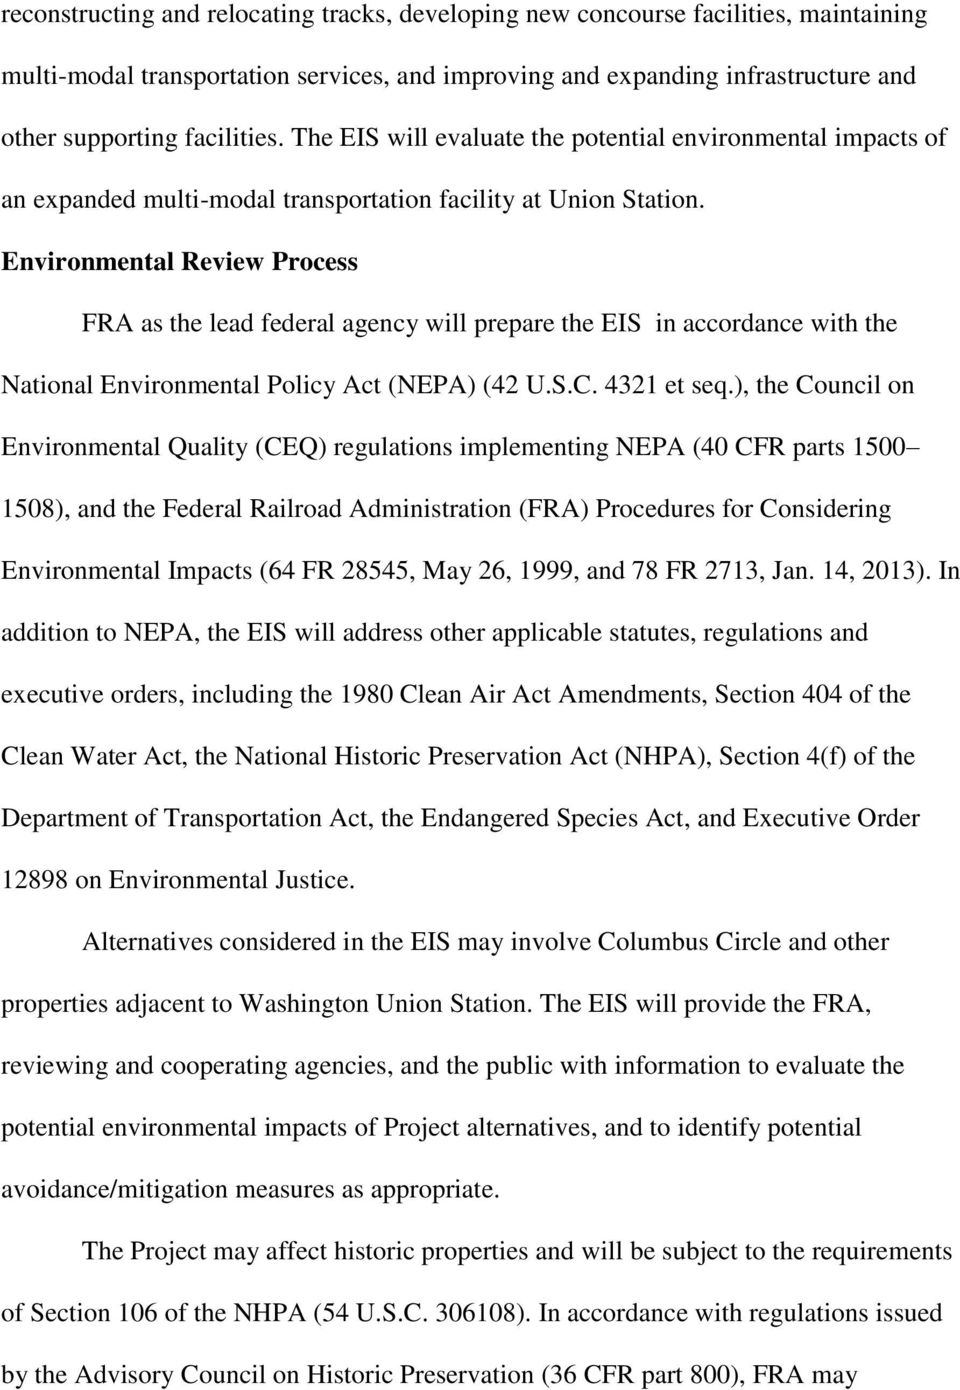 Environmental Review Process FRA as the lead federal agency will prepare the EIS in accordance with the National Environmental Policy Act (NEPA) (42 U.S.C. 4321 et seq.